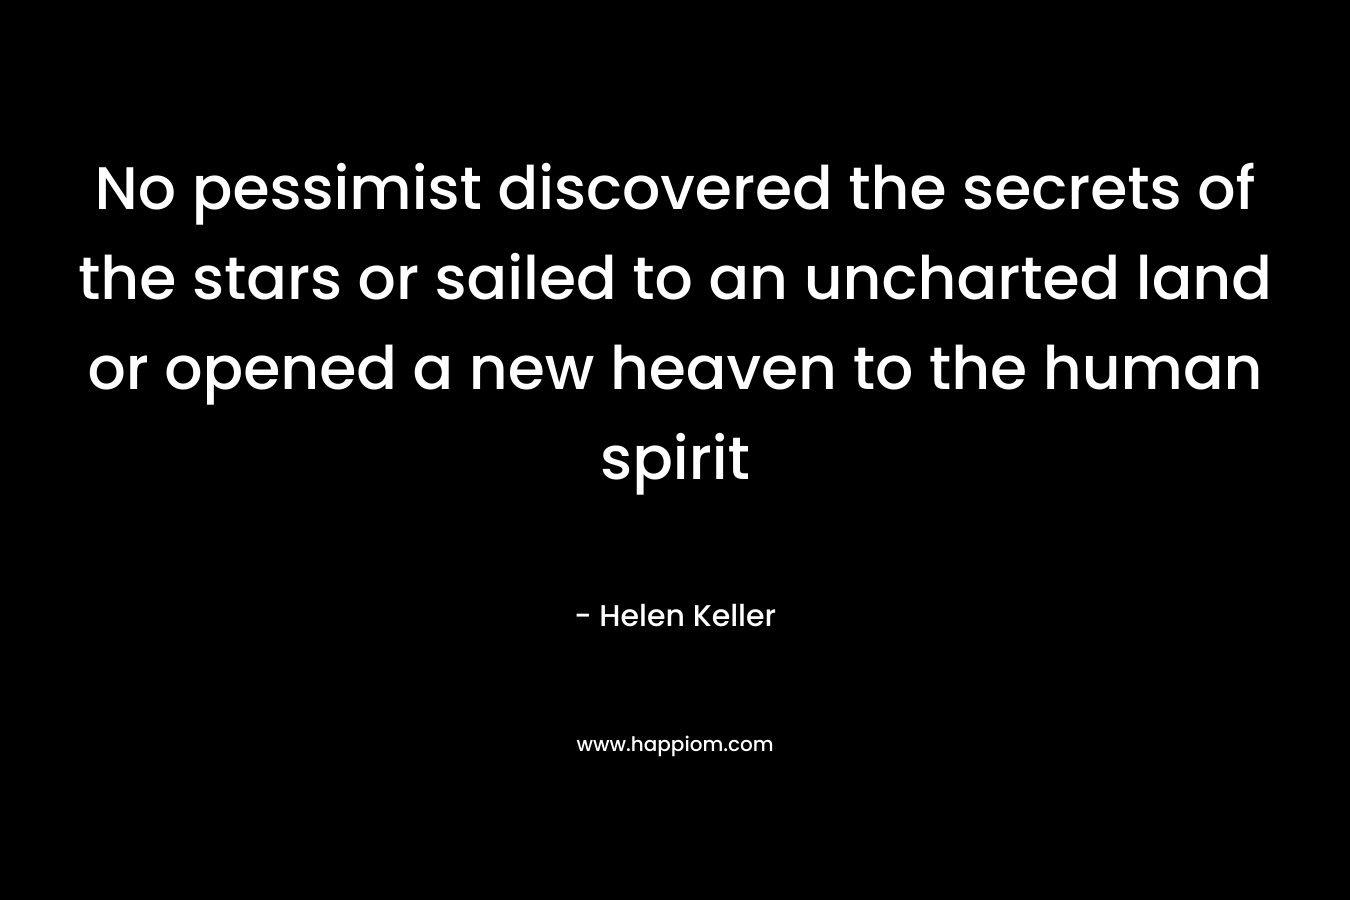 No pessimist discovered the secrets of the stars or sailed to an uncharted land or opened a new heaven to the human spirit